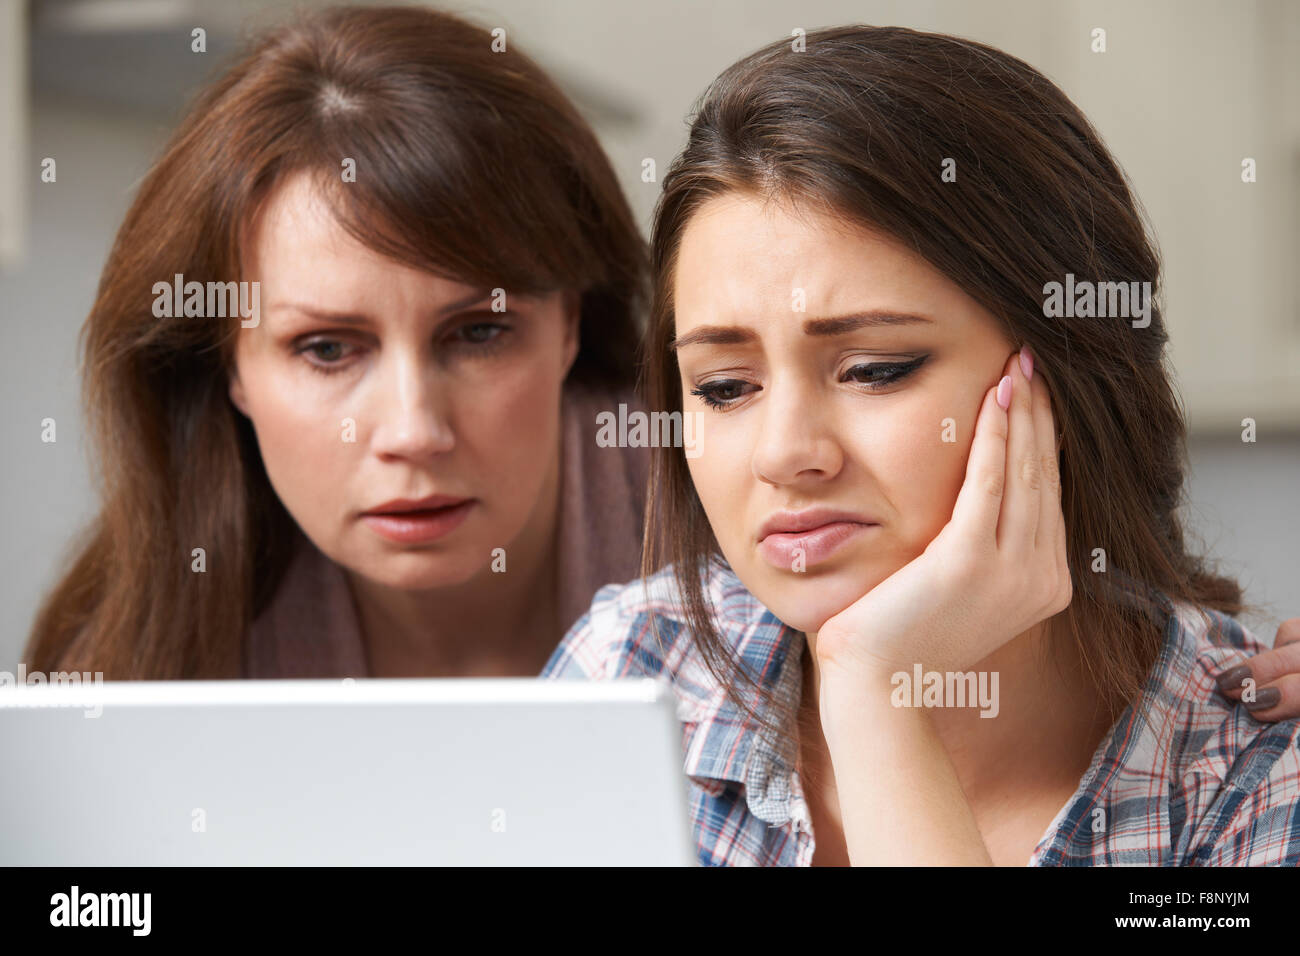 Mother Comforting Daughter Victimized By Online Bullying Stock Photo